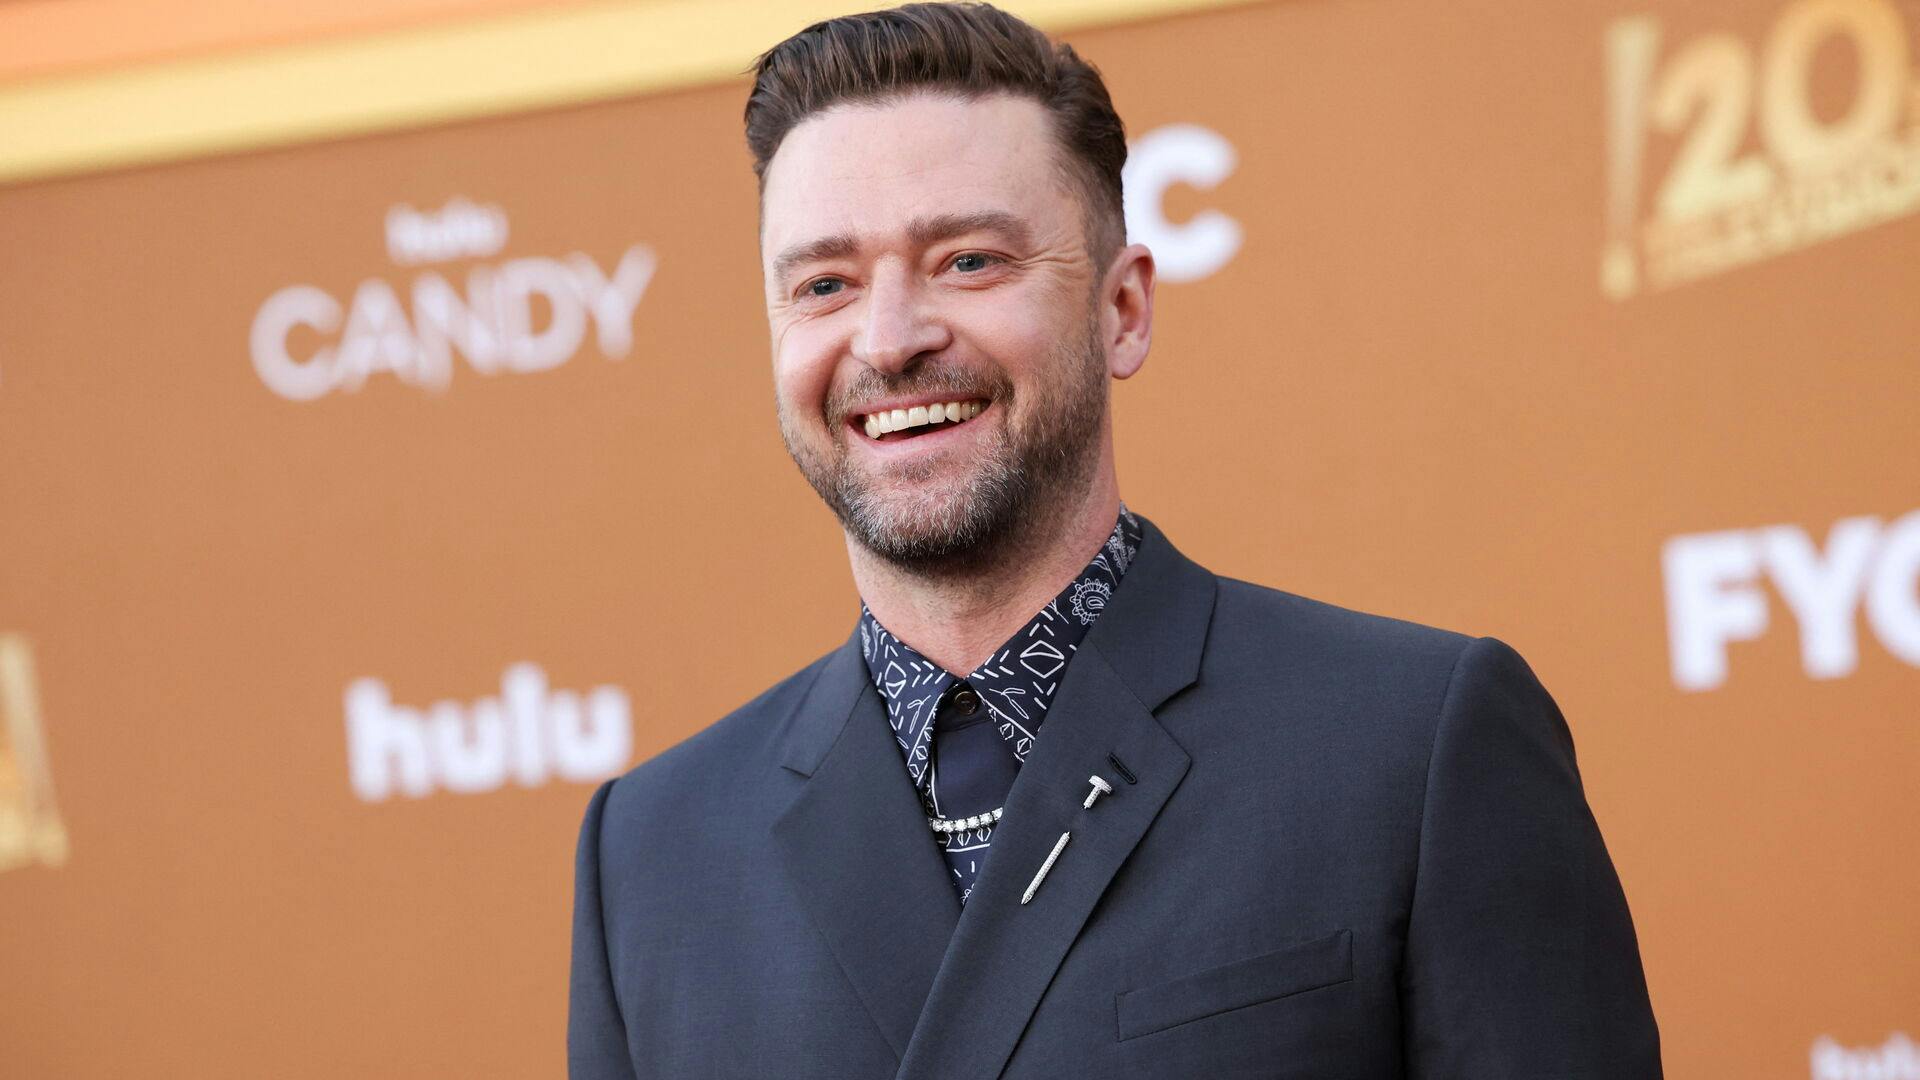 Singer Justin Timberlake attend an event for the television series Candy at El Capitan theatre in Los Angeles, California, U.S. May 9, 2022. REUTERS/Mario Anzuoni